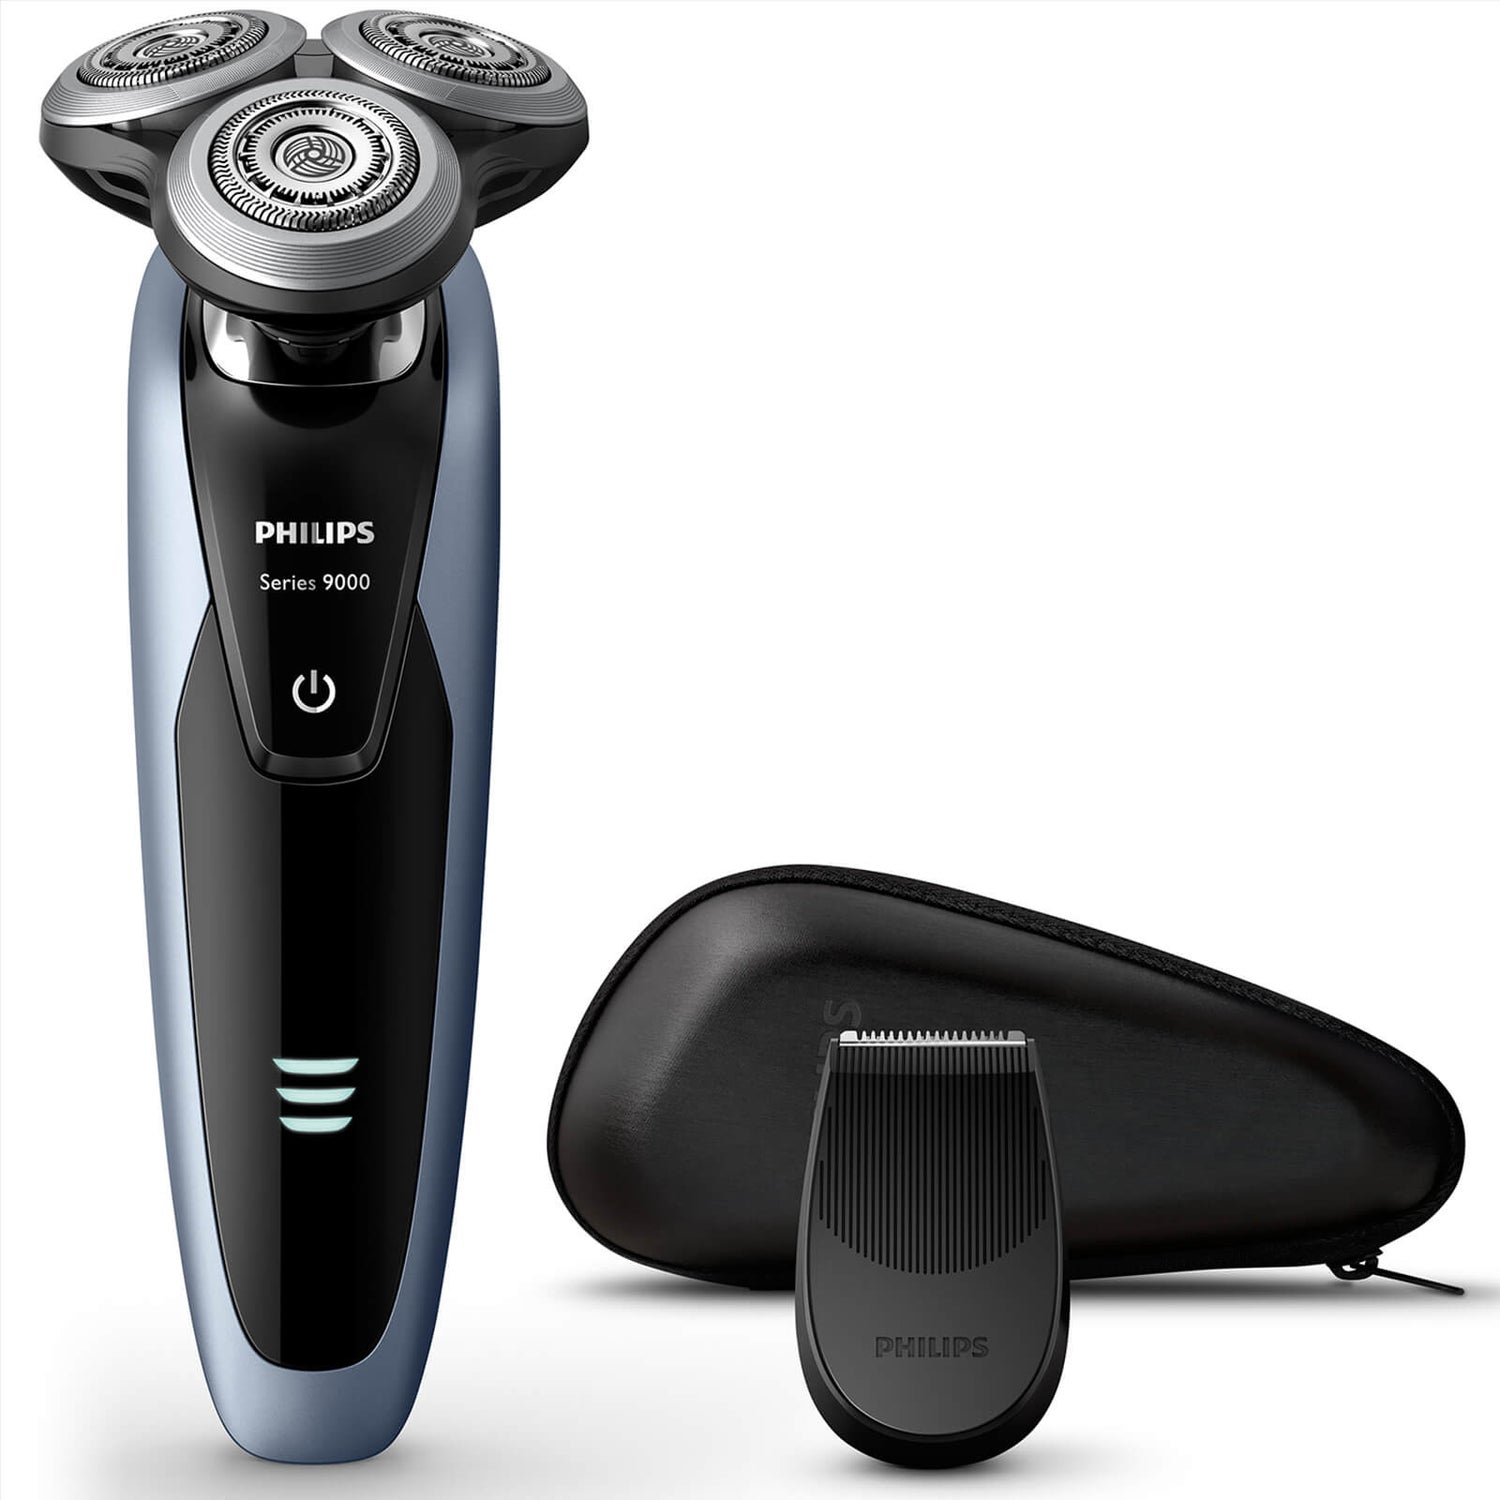 Philips Men's S9211/12 Series 9000 Wet and Dry Electric Shaver with Precision Trimmer